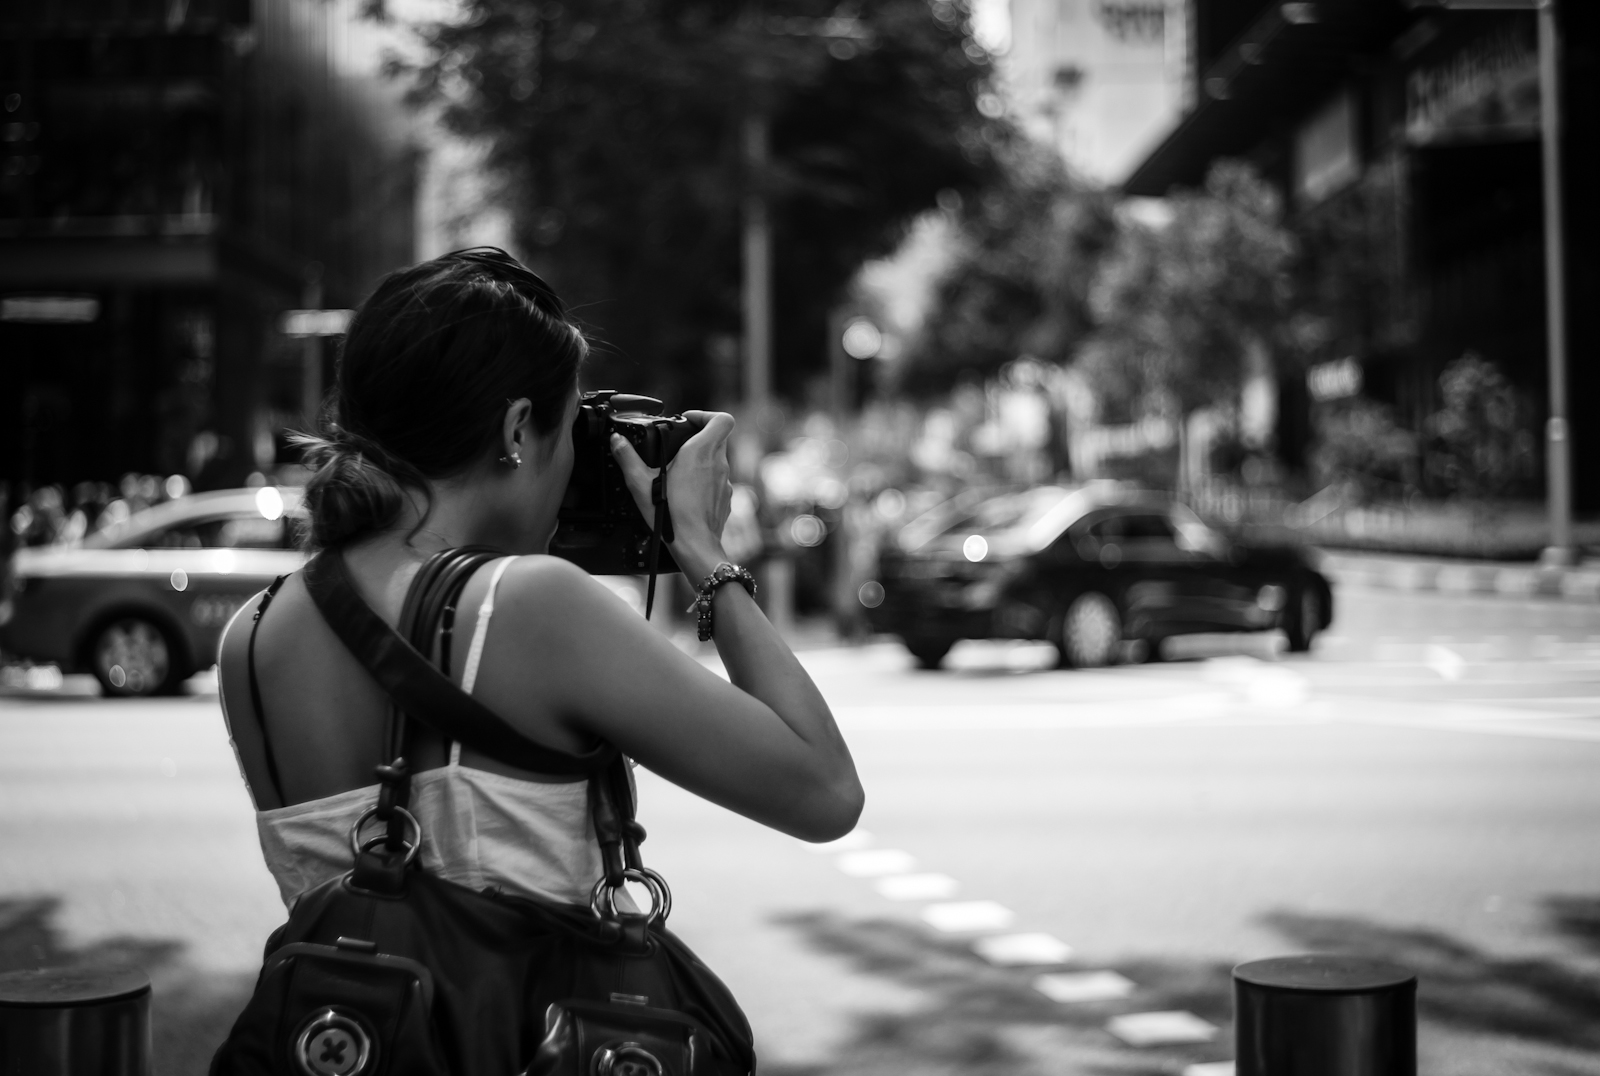 Street photography - Woman shooting with a DSLR camera